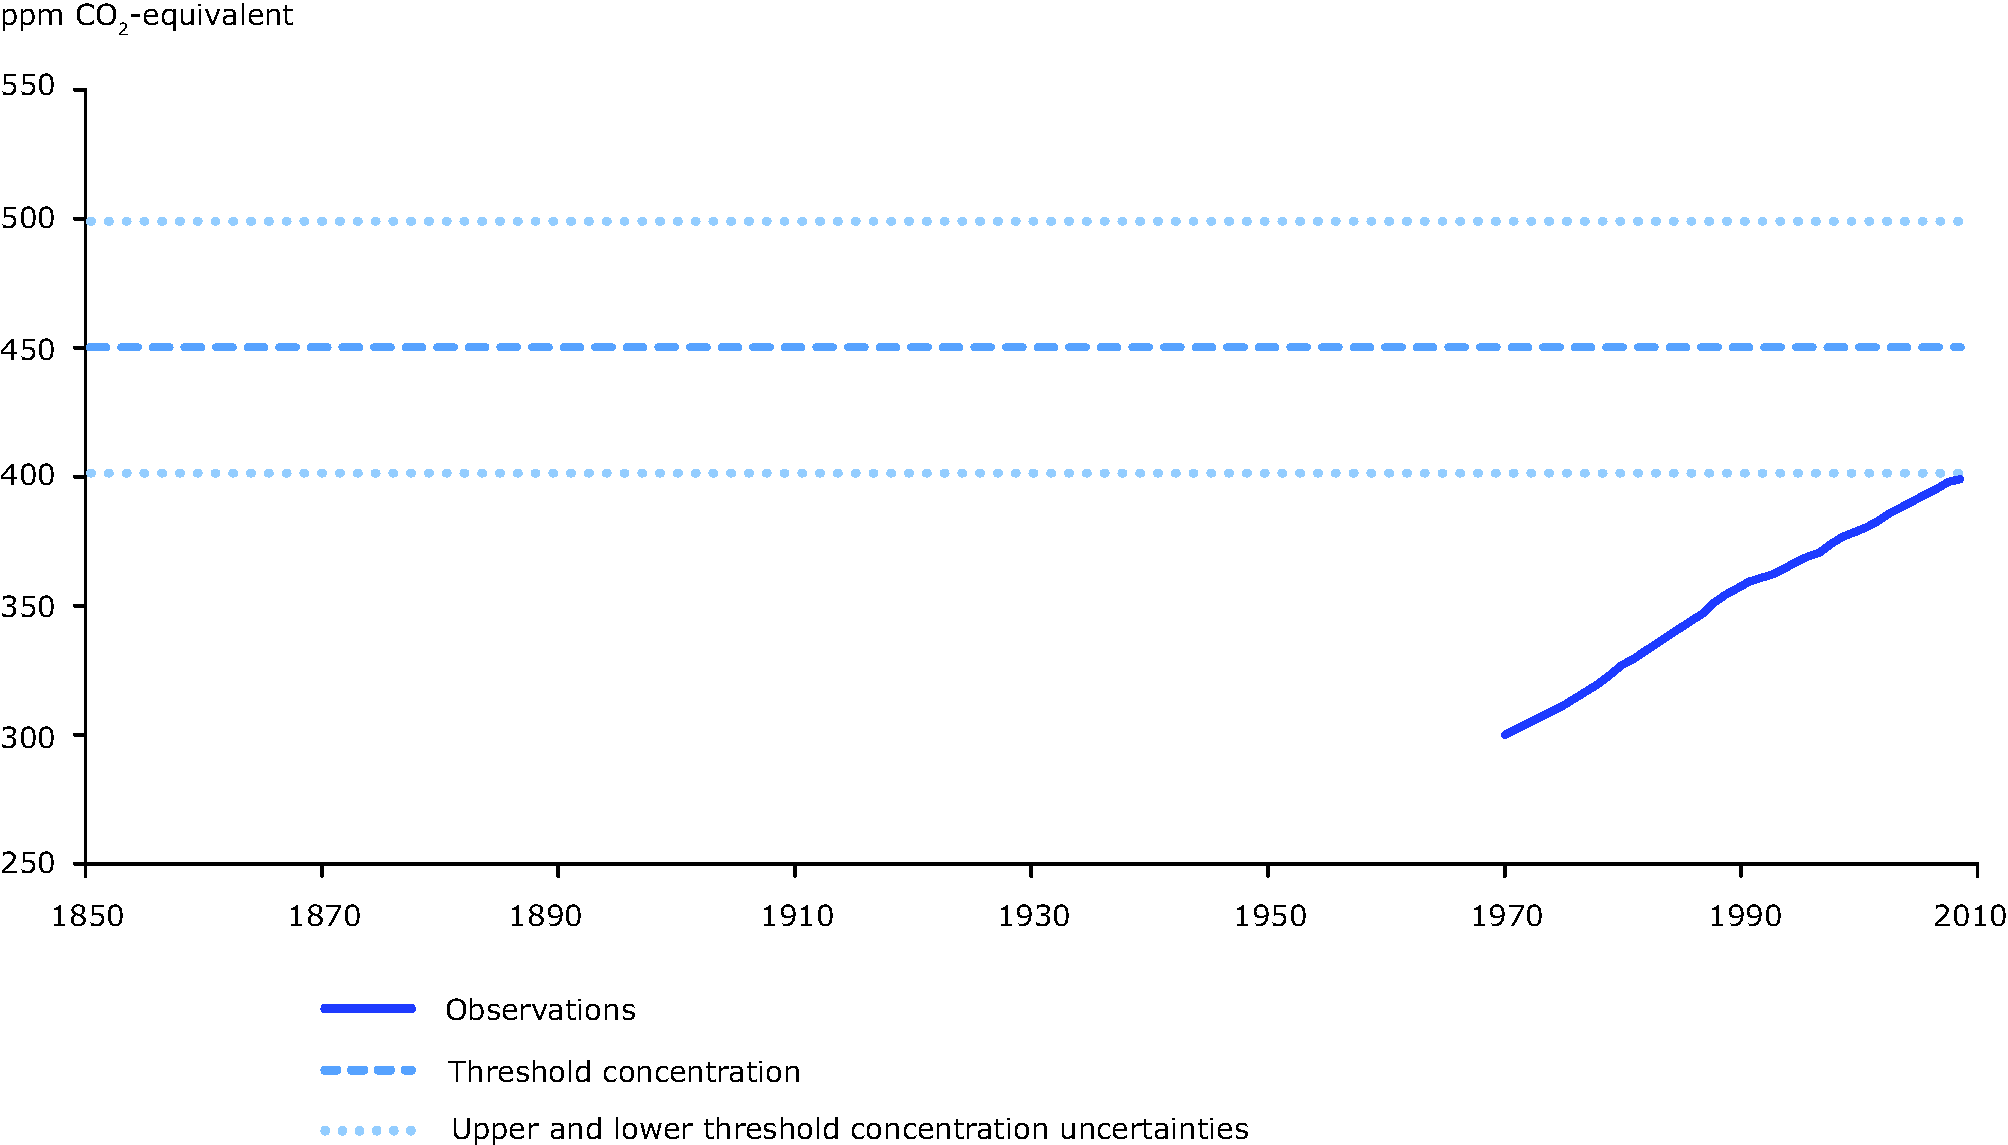 Observed trends in total greenhouse concentrations, considering all greenhouse gases (incl. aerosols)